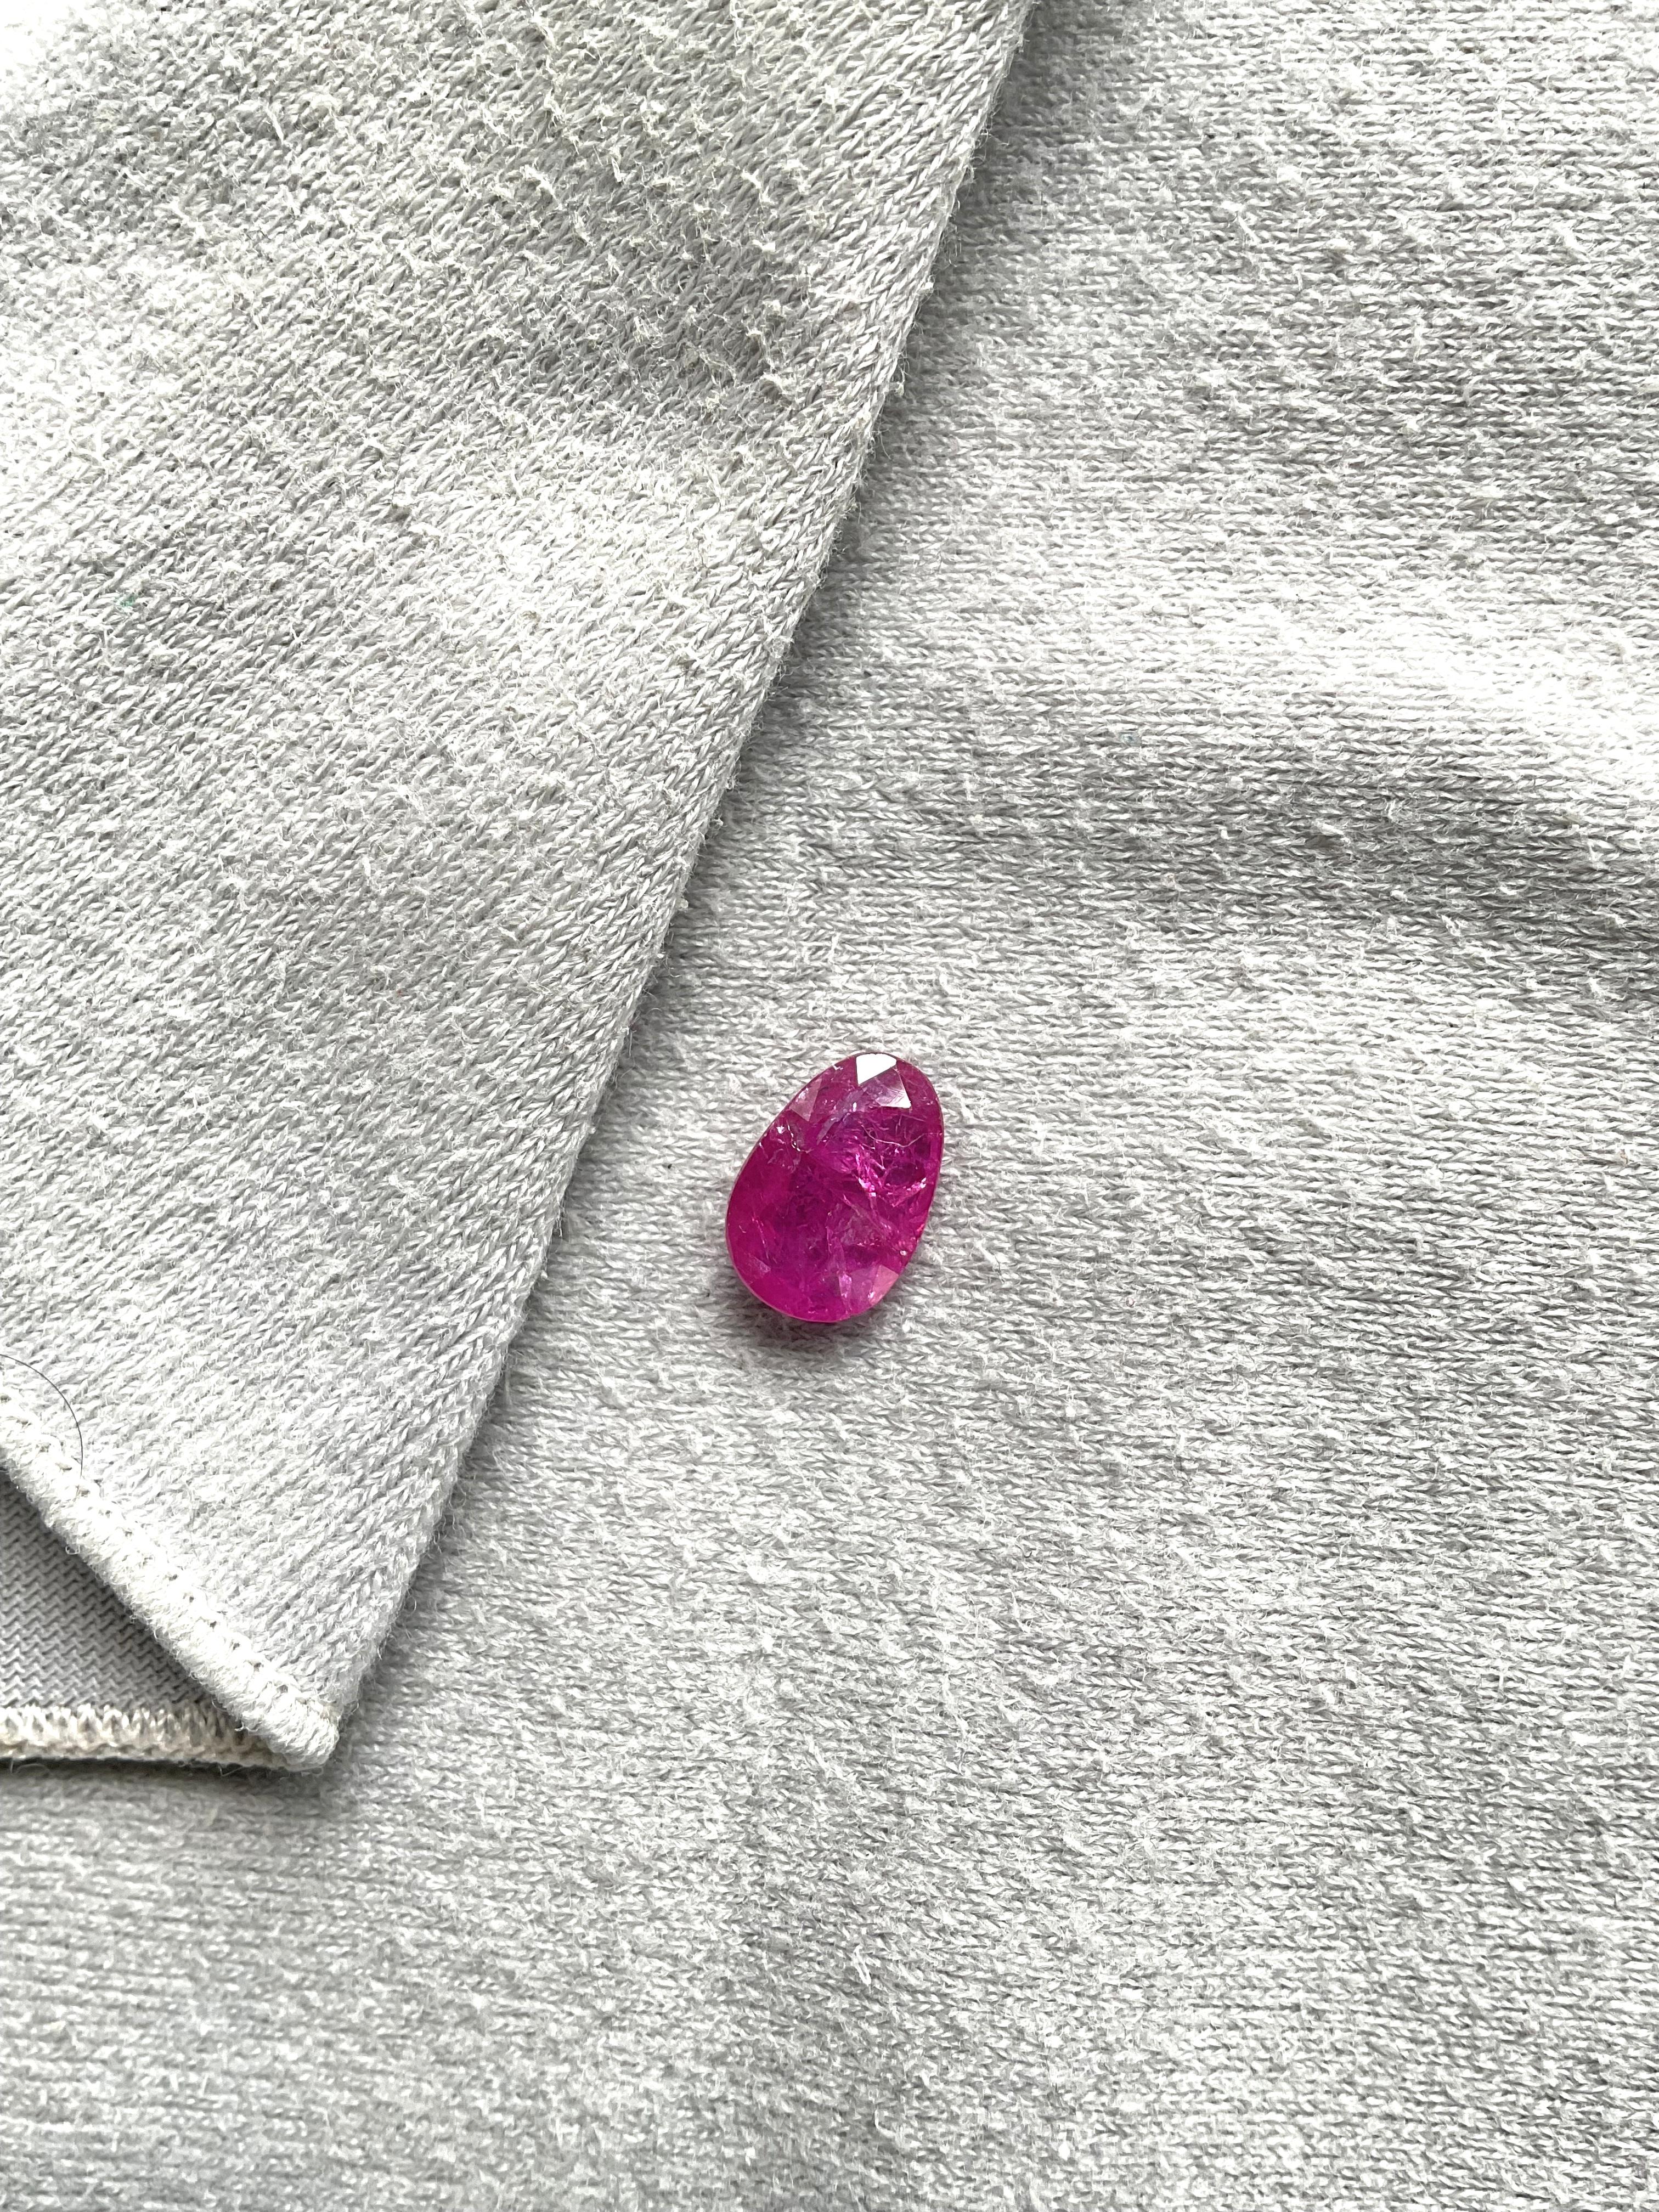 Oval Cut Certified 2.89 Carats Mozambique Ruby Pear Faceted Cutstone No Heat Natural Gem For Sale